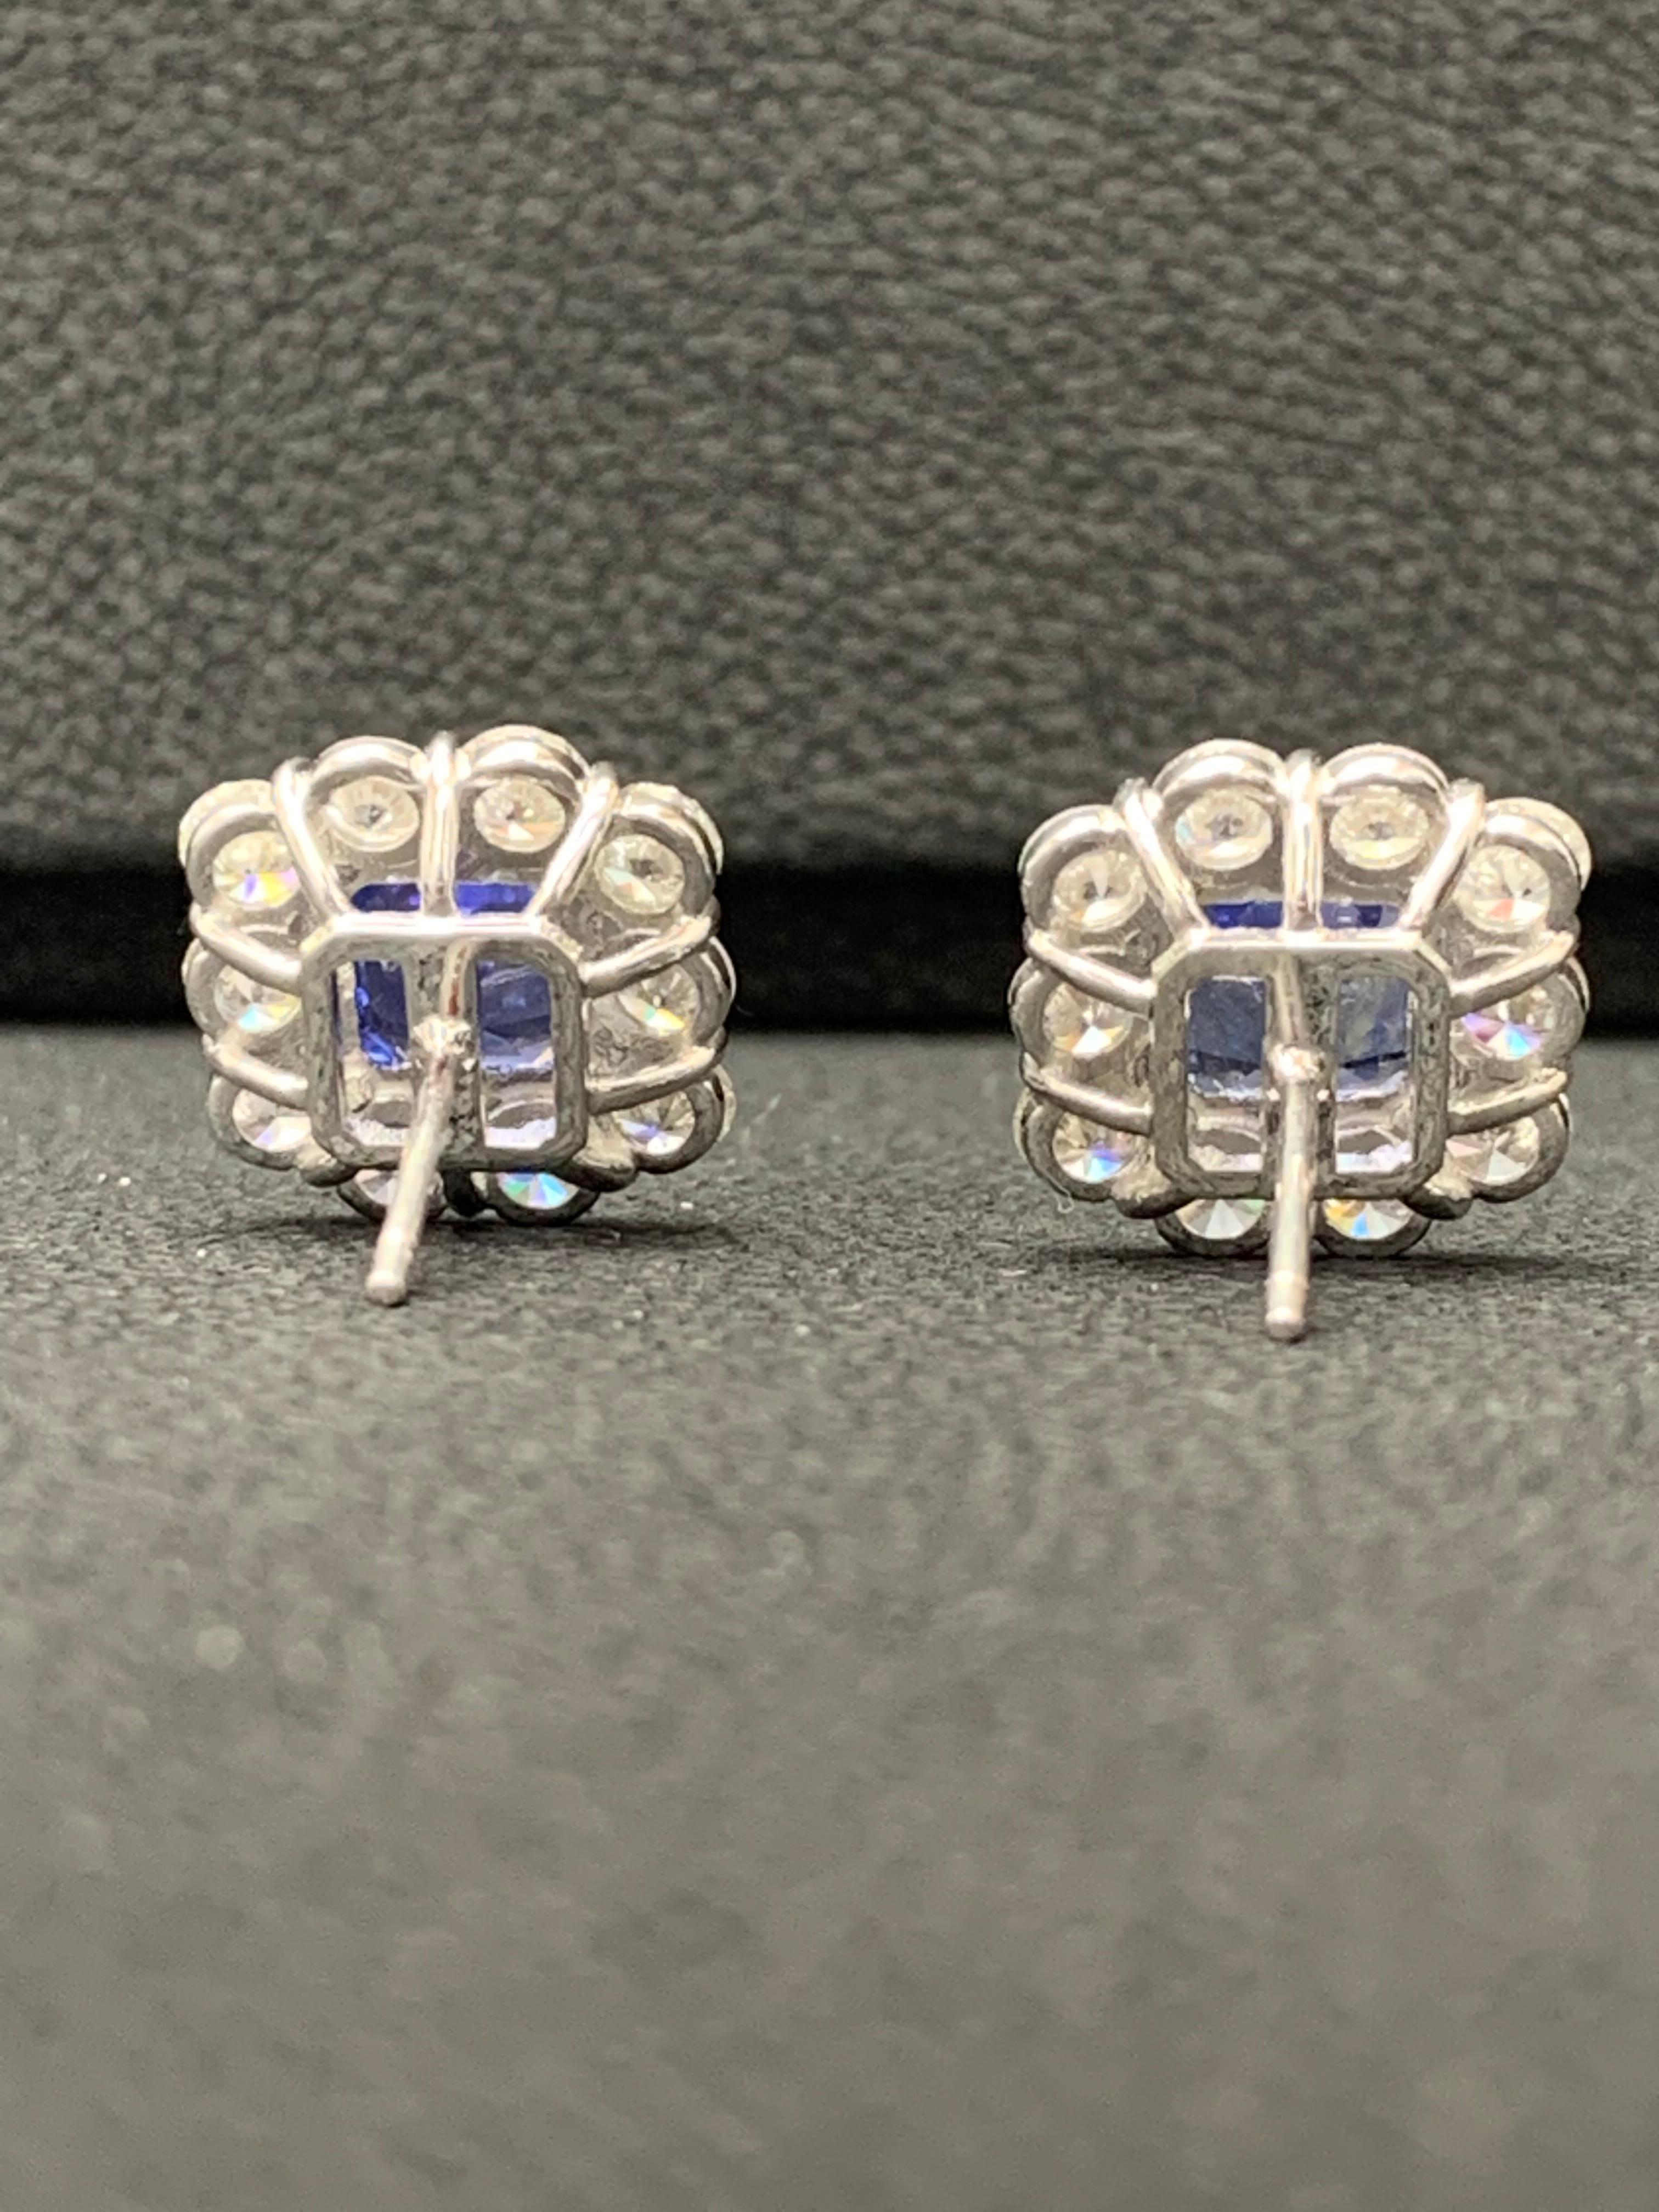 Men's 3.20 Carat Emerald Cut Blue Sapphire and Diamond Stud Earrings in 18K White Gold For Sale